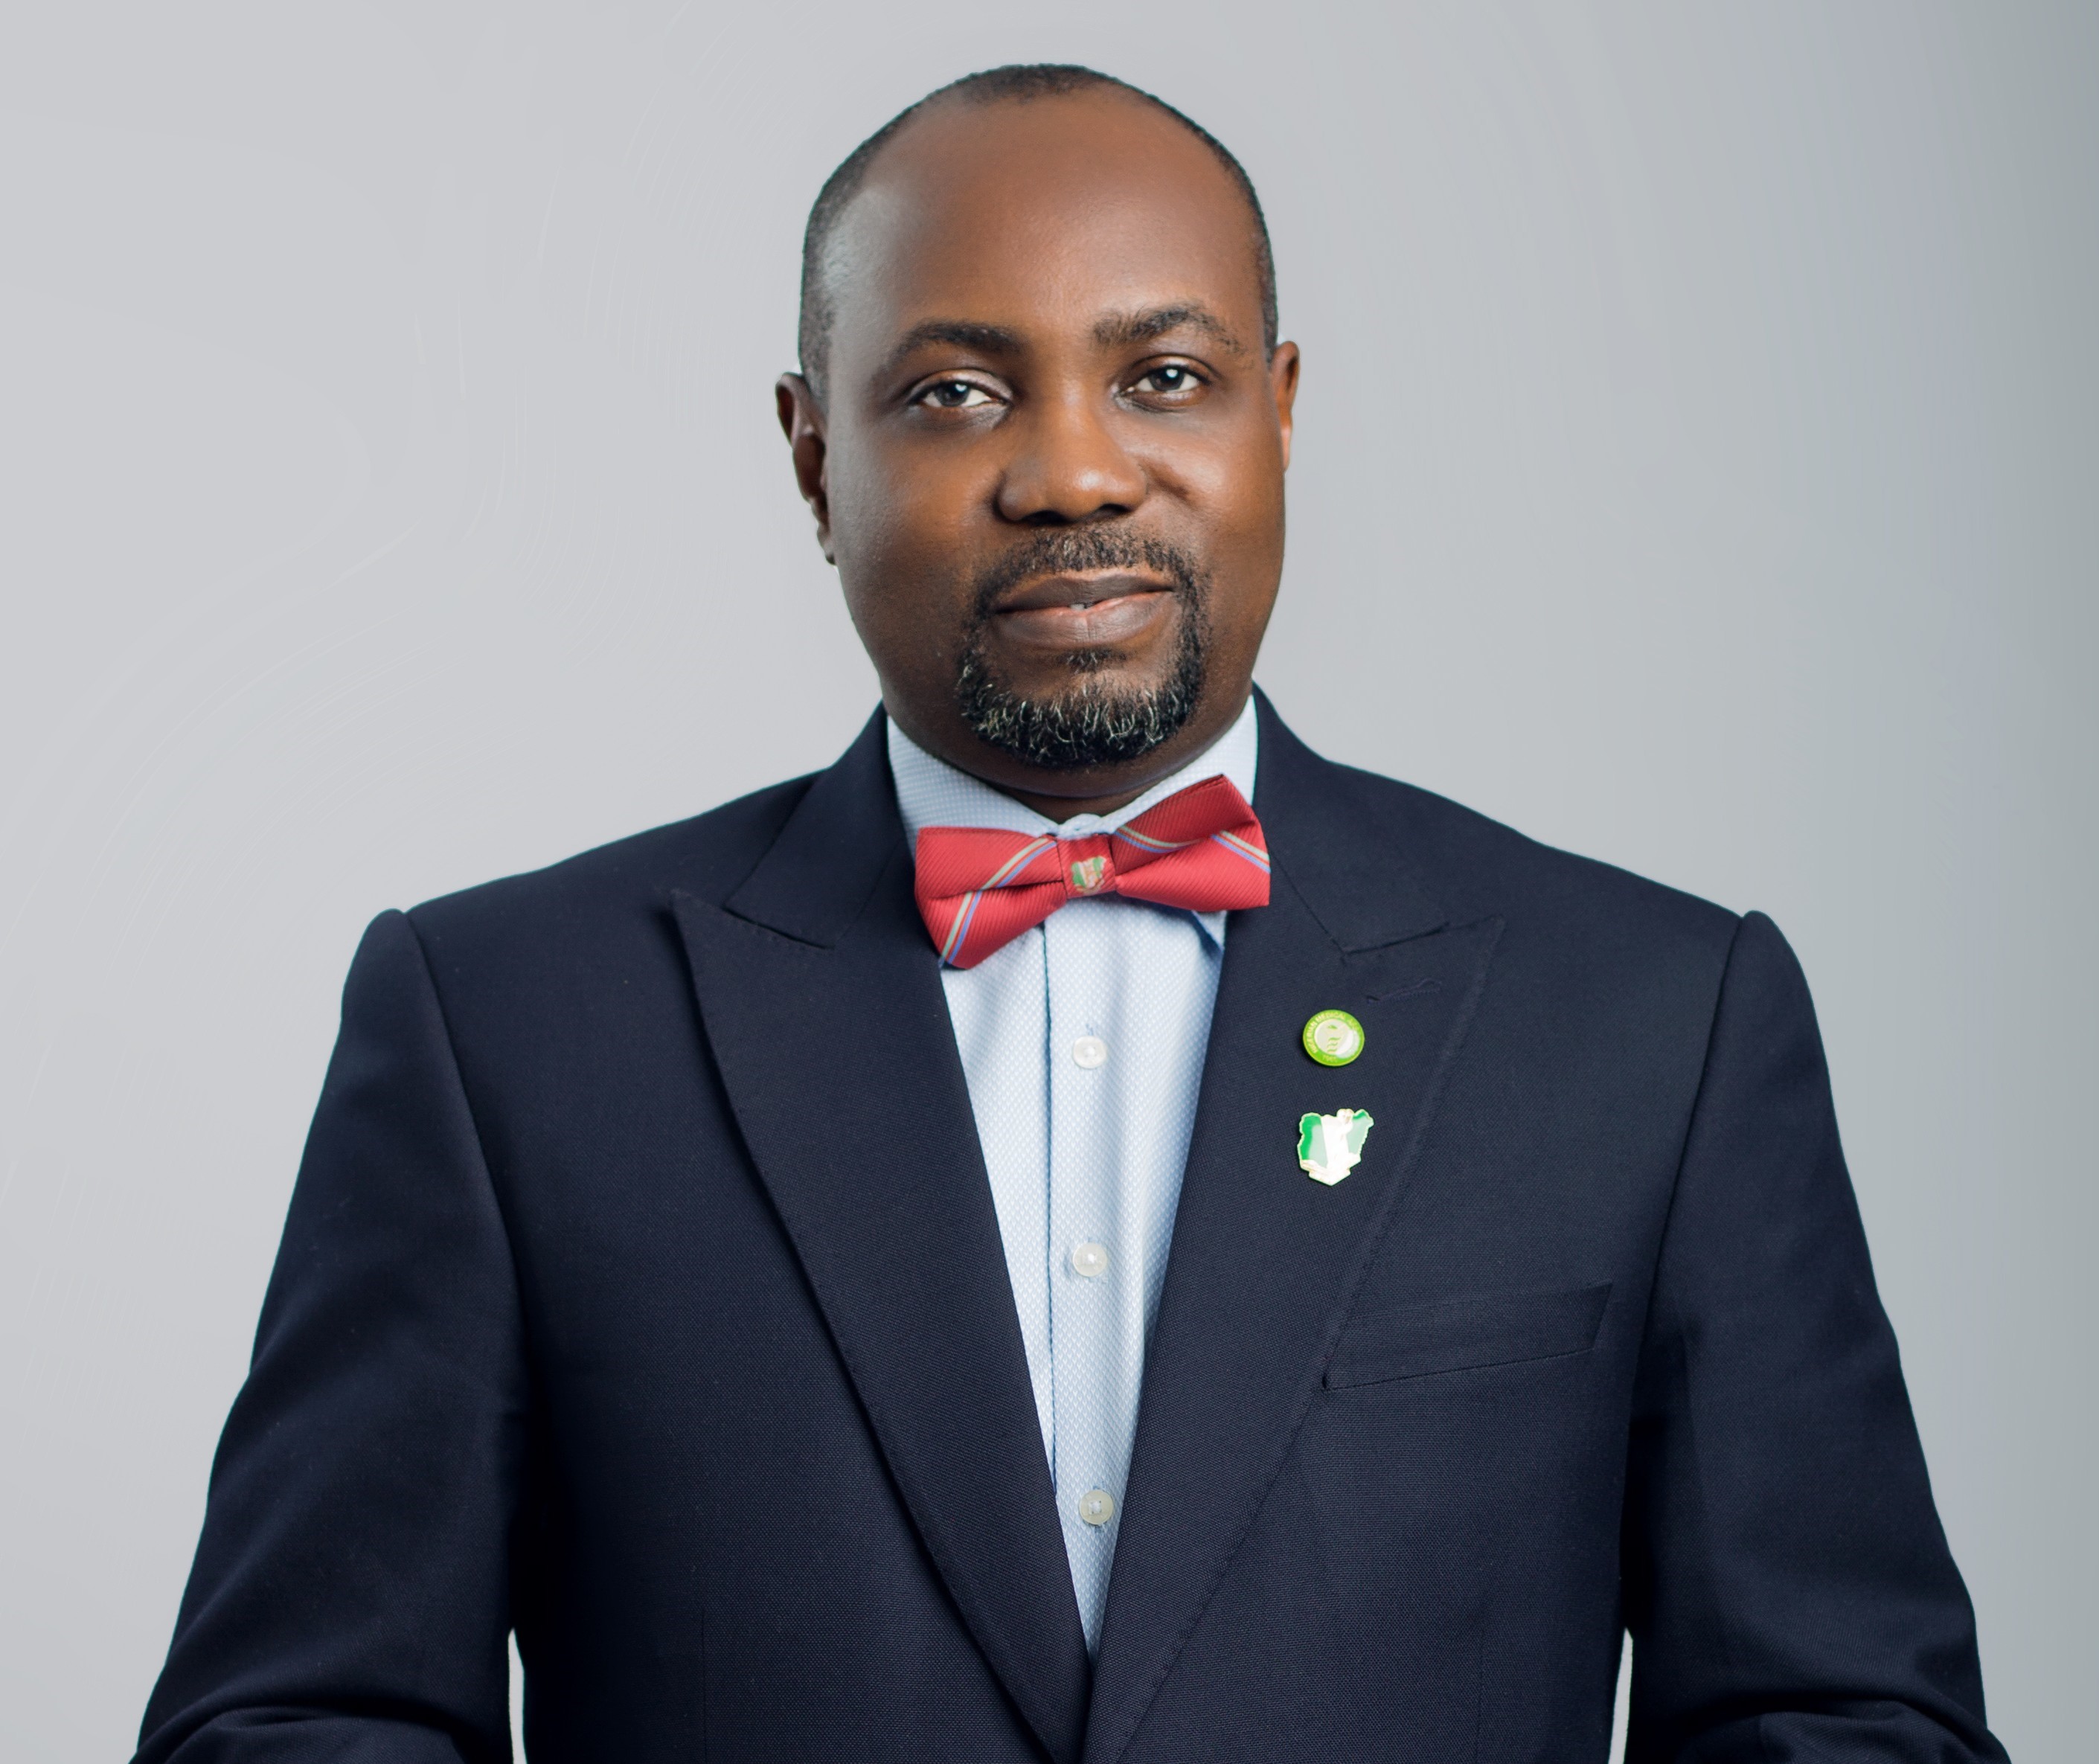 Victor Makanjuola, Alumnus of CoMUI’s MBBS Class of 1998  Reports on His Stewardship of the Secretariat of the Medical and Dental Consultants’ Association of Nigeria (MDCAN) 2021-2023